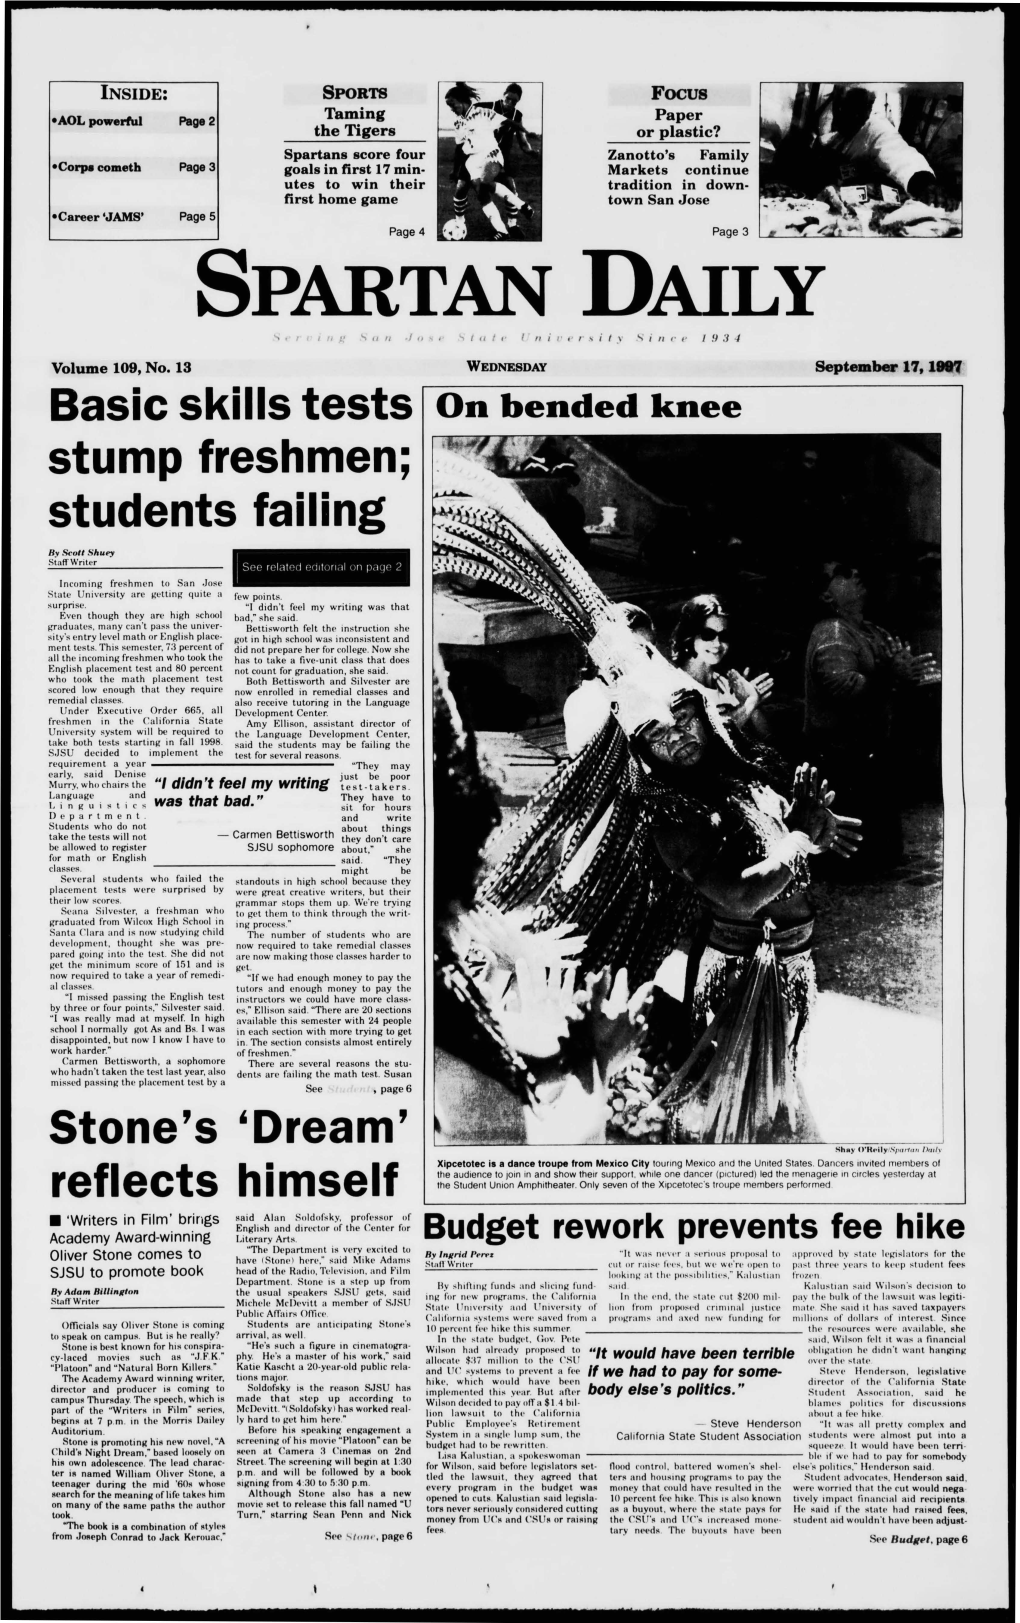 Students Failing Stone's Reflects 'Dream' Himself